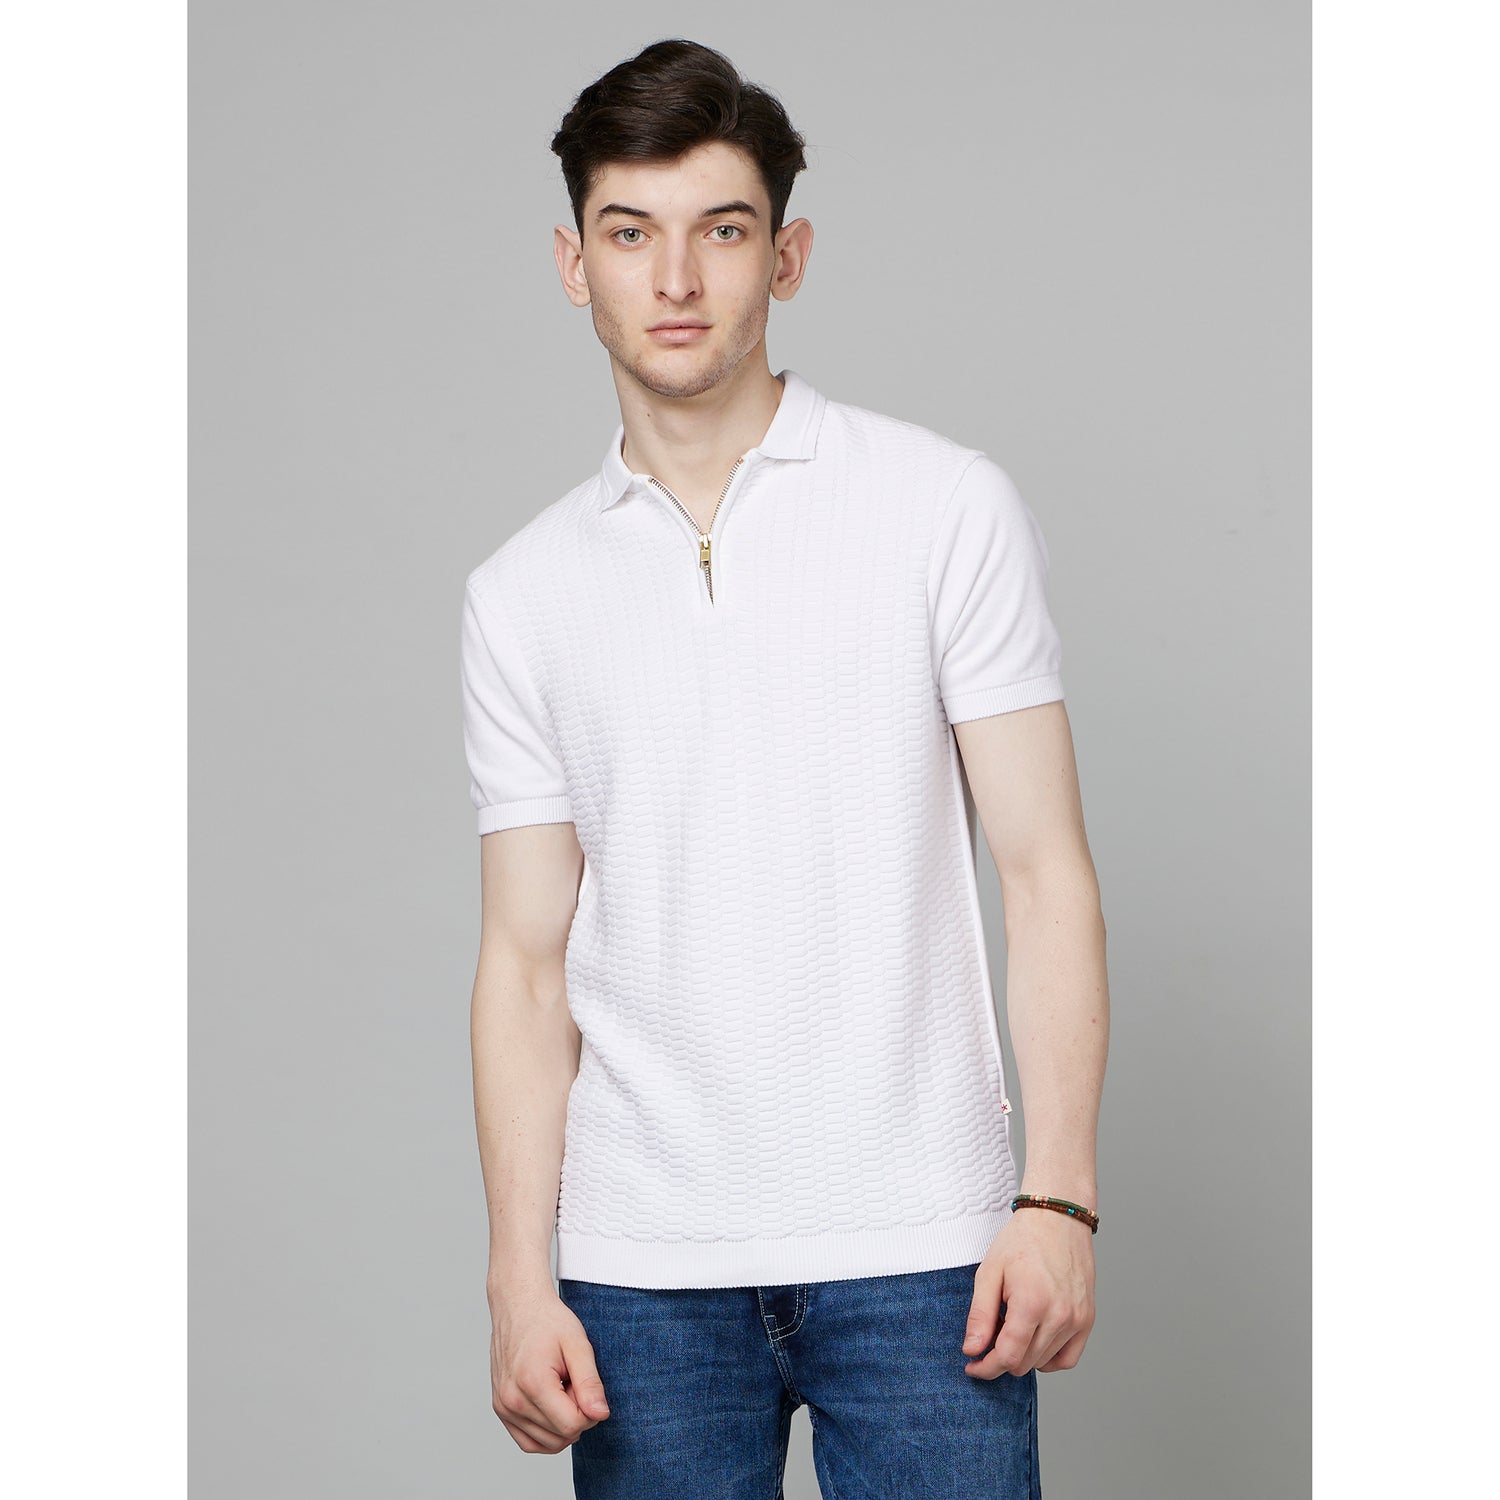 White Solid Short Sleeves Polo T-Shirt